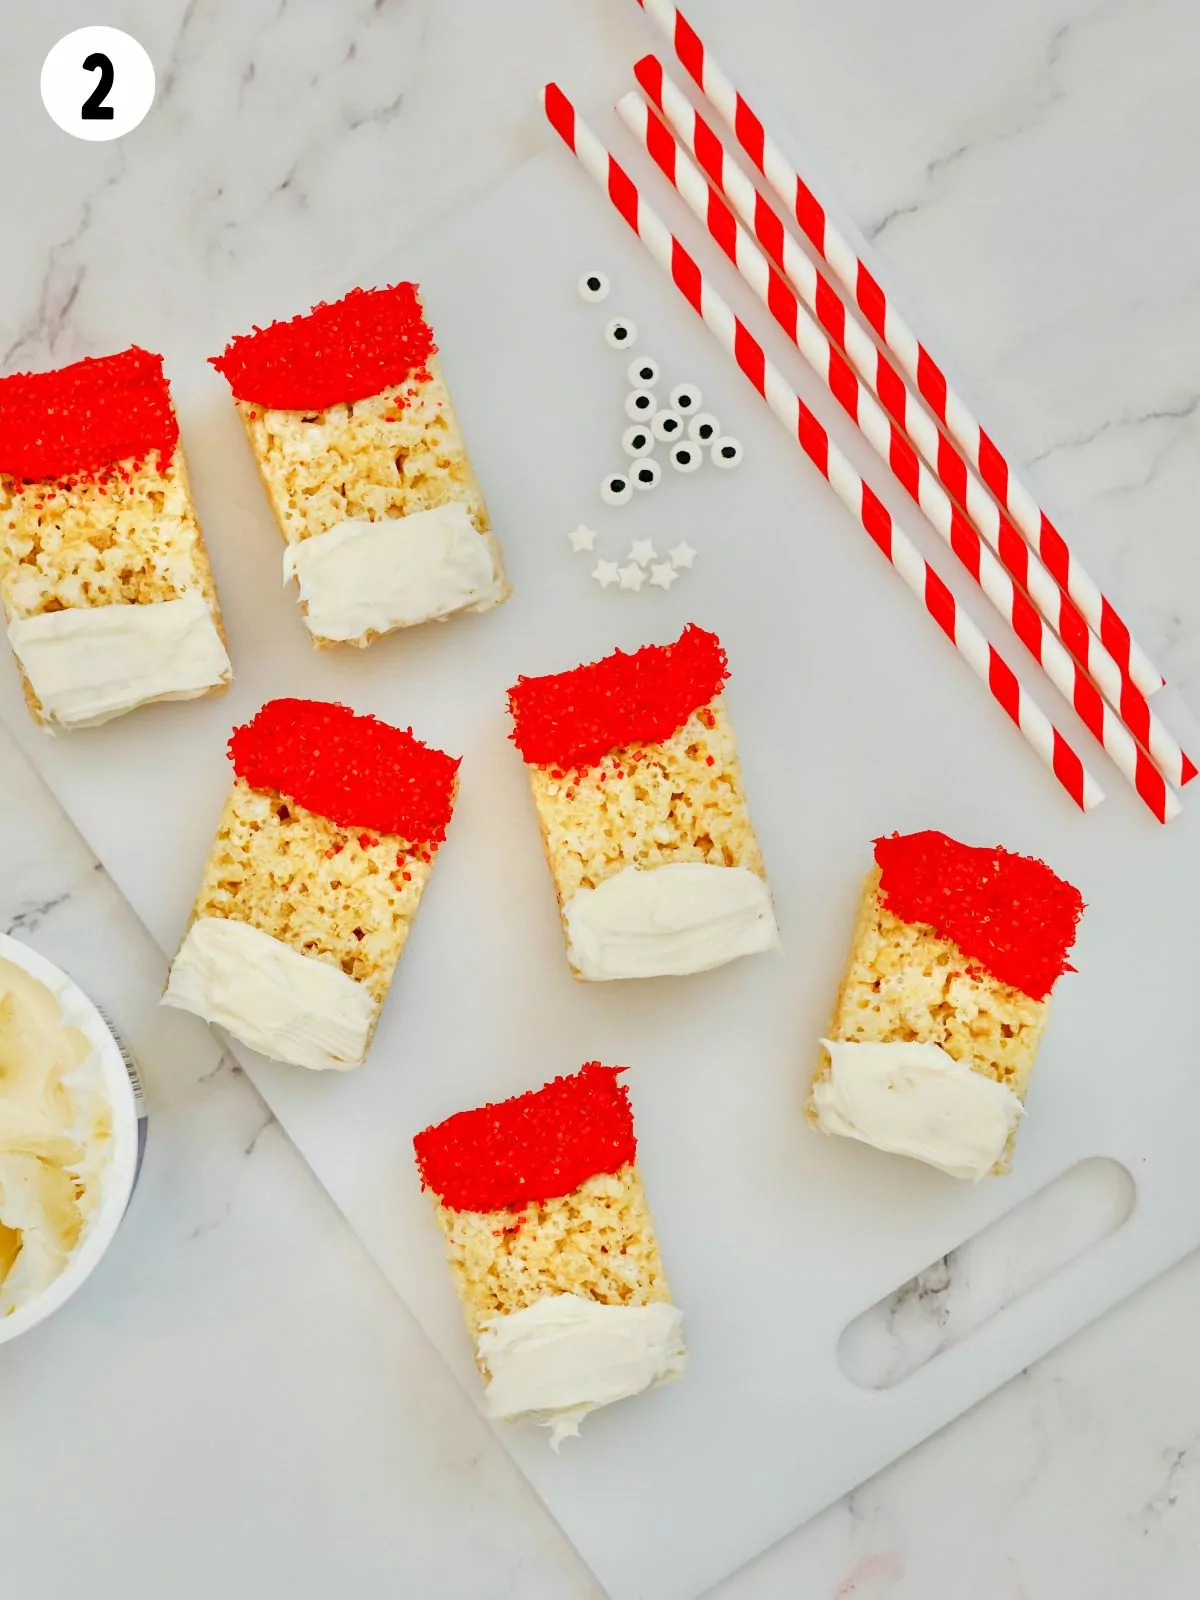 6 rice krispie treats with red and white frosting to look like Santa.